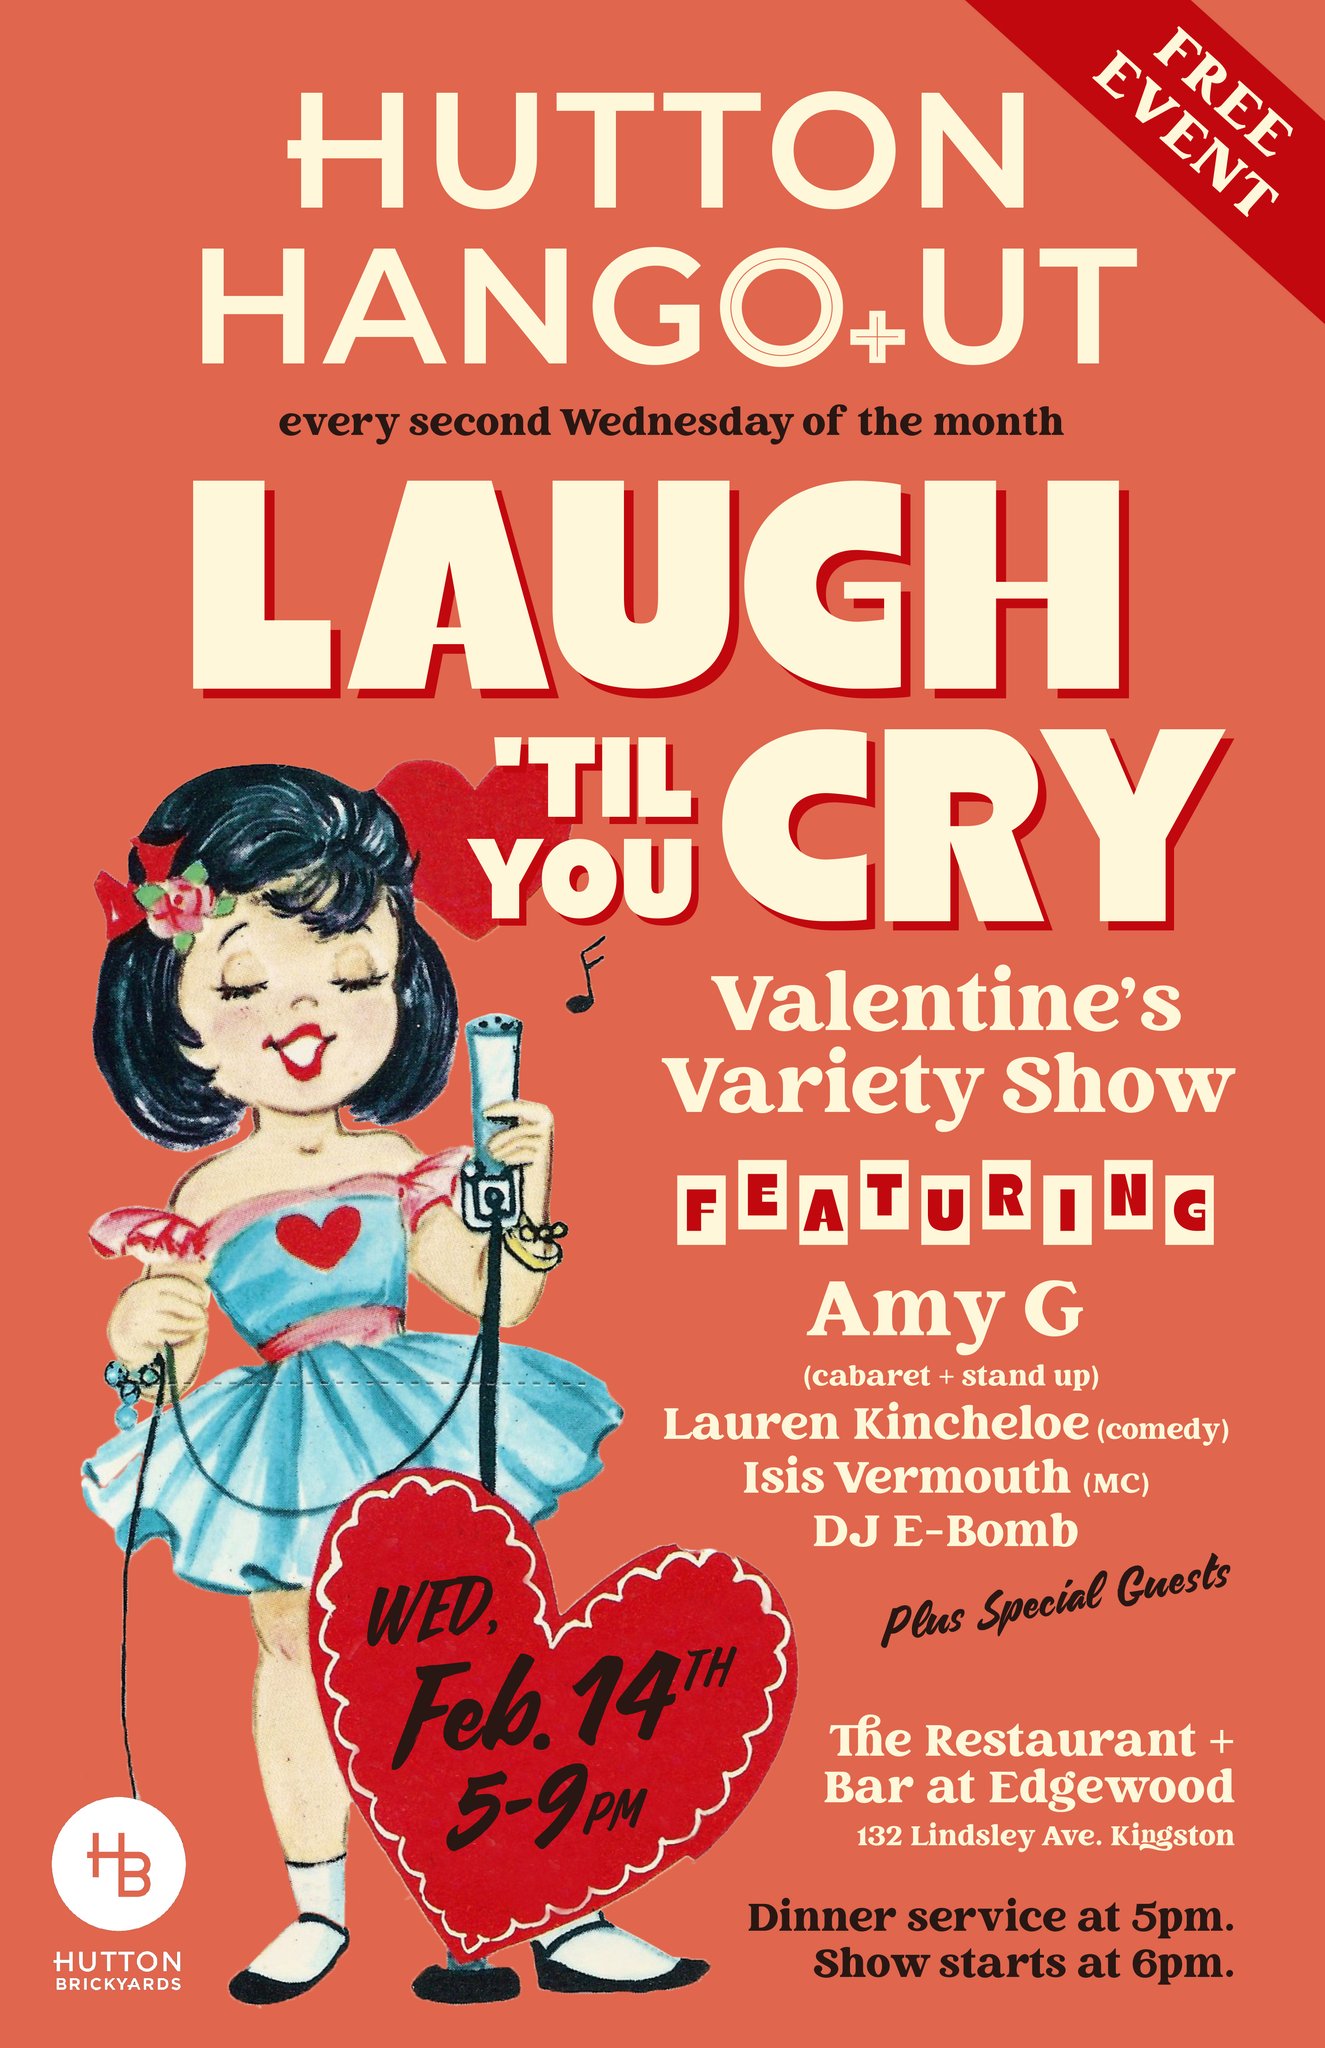 HuttO+n Hangout: Laugh Till You Cry Valentine's Day VARIETY SHOW!!